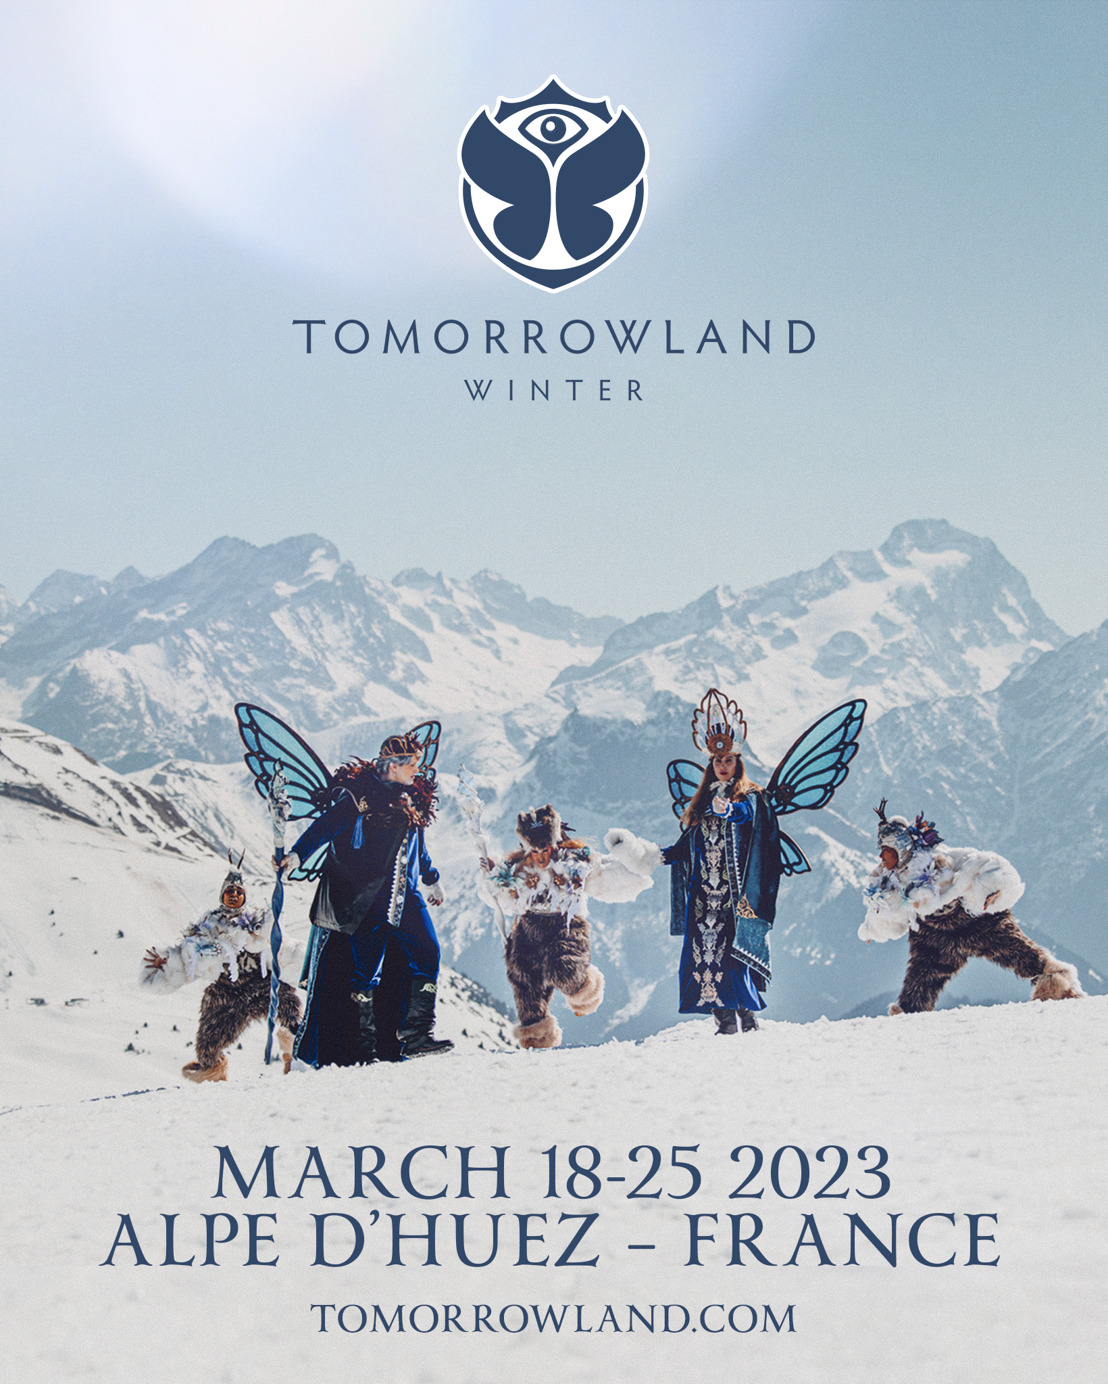 Get ready for the ultimate winter sports holiday & festival experience at Tomorrowland Winter 2023